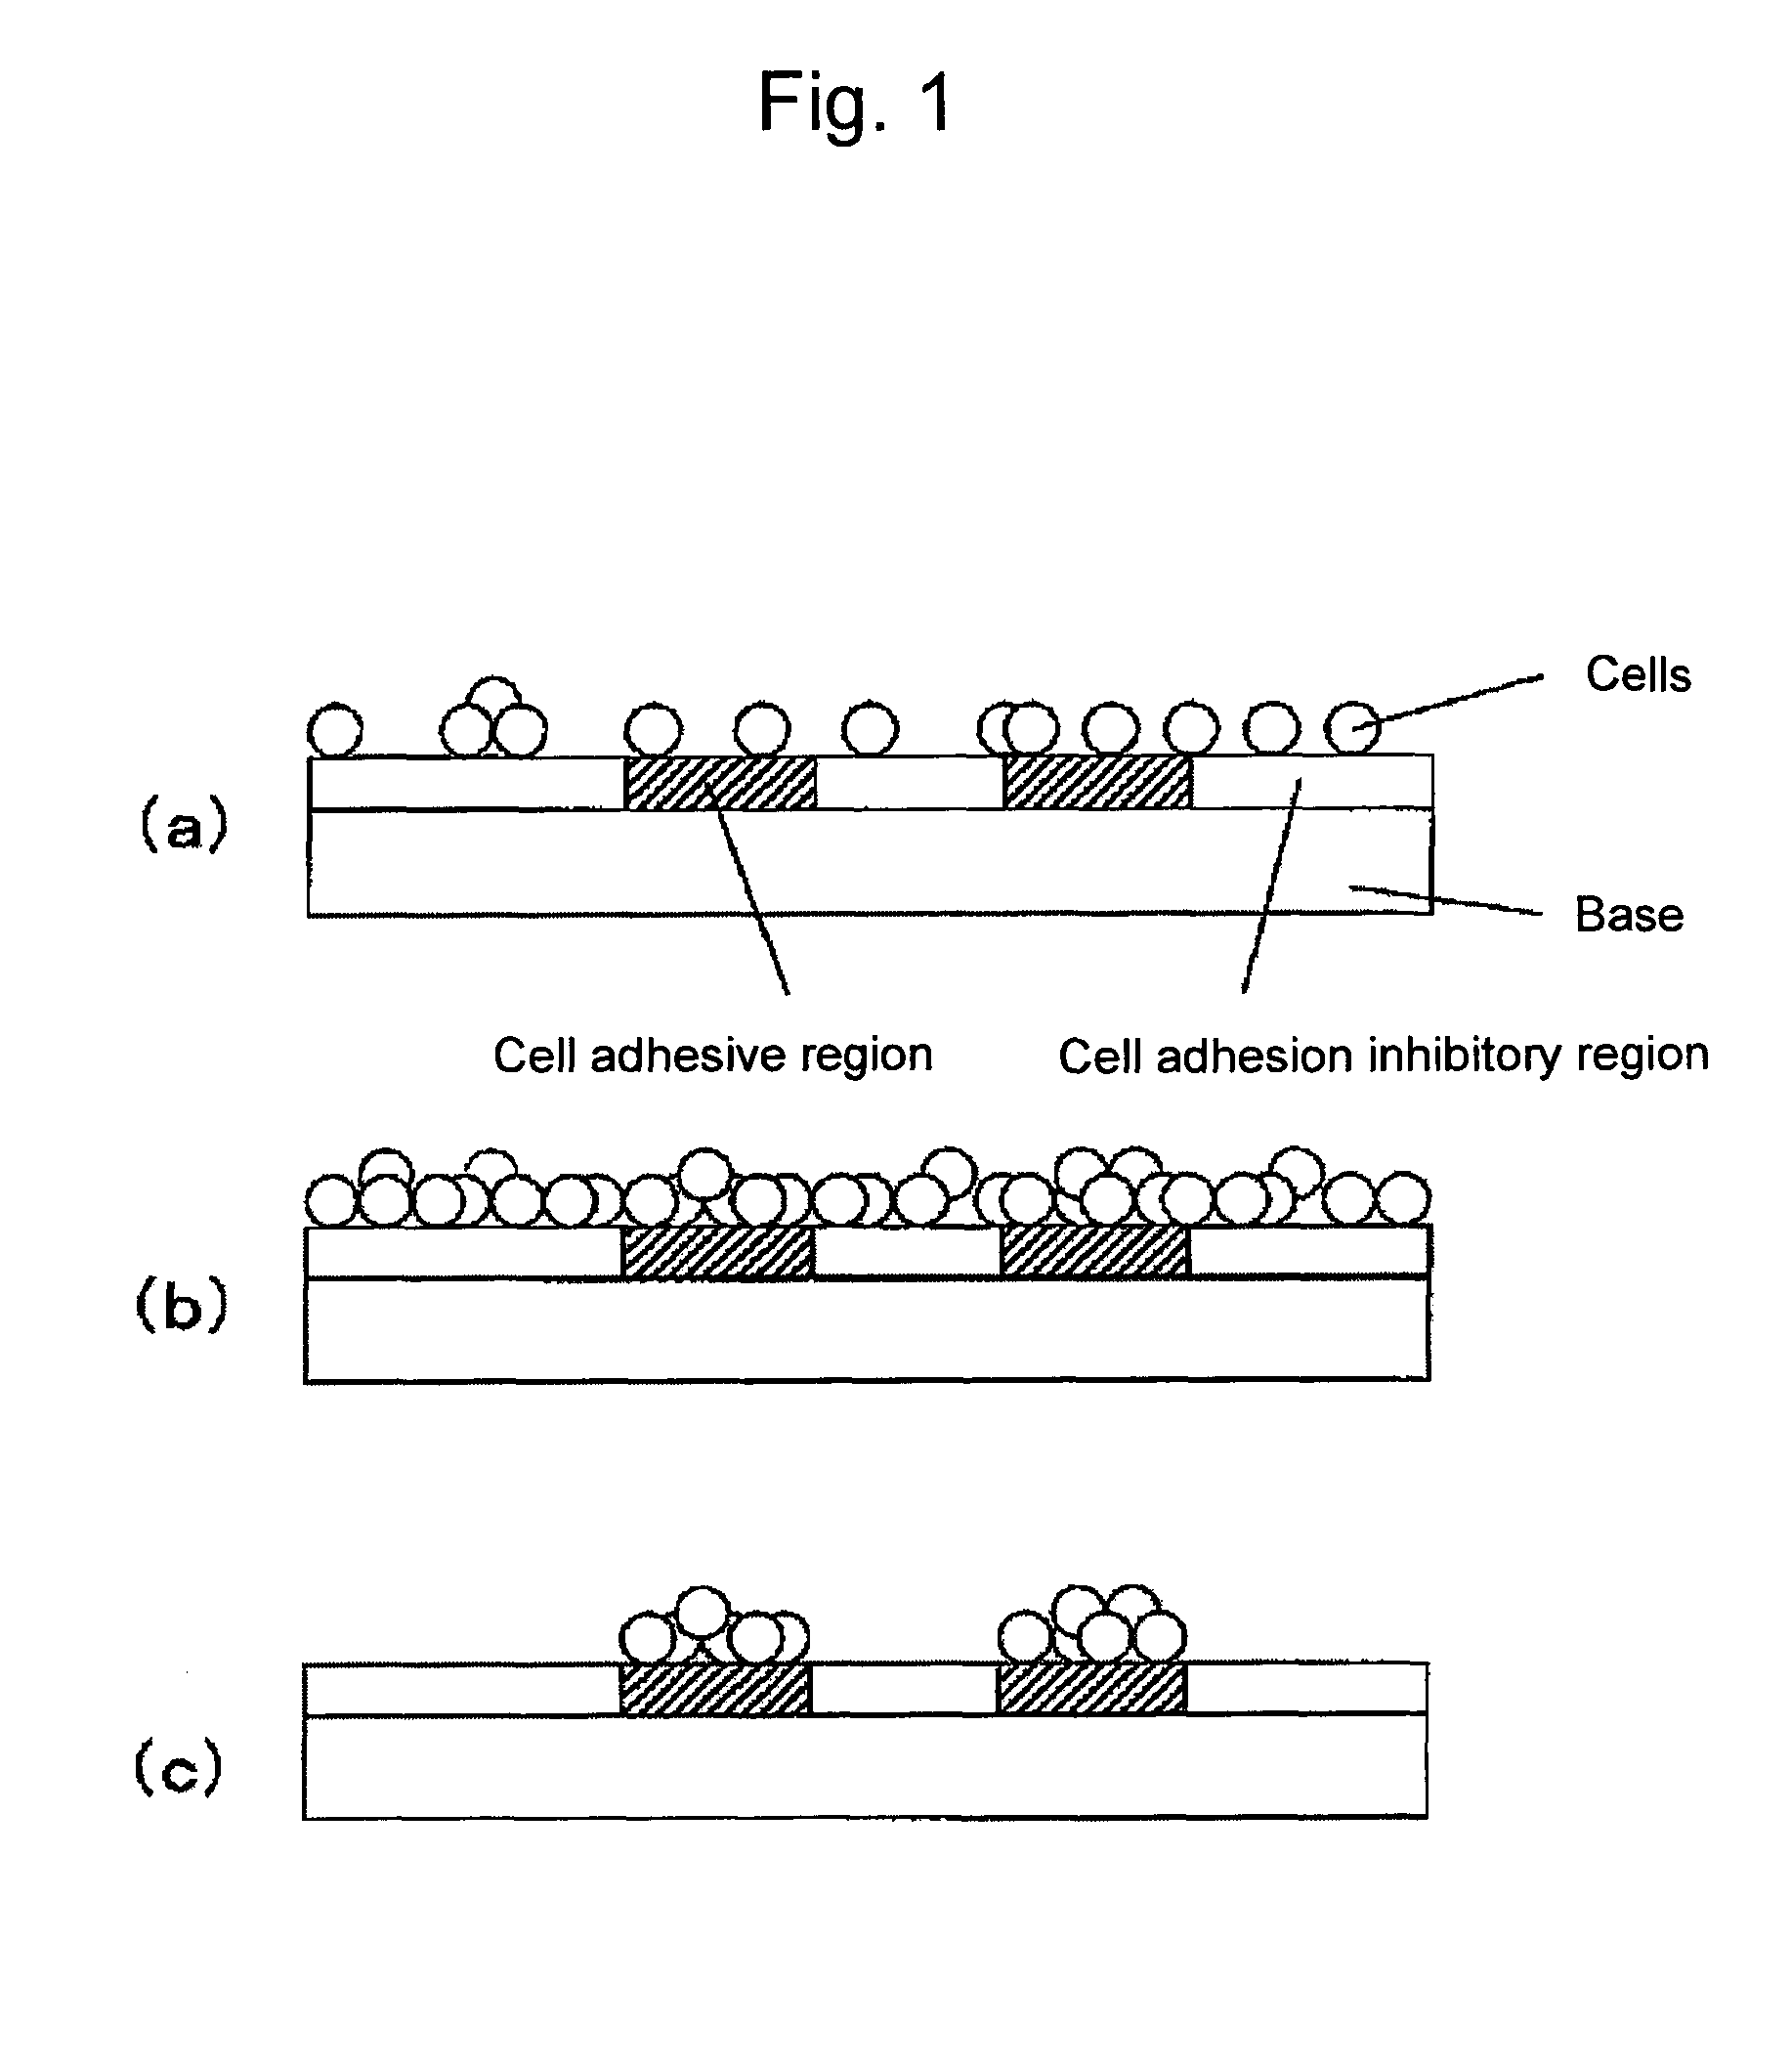 Substrate for cell culture